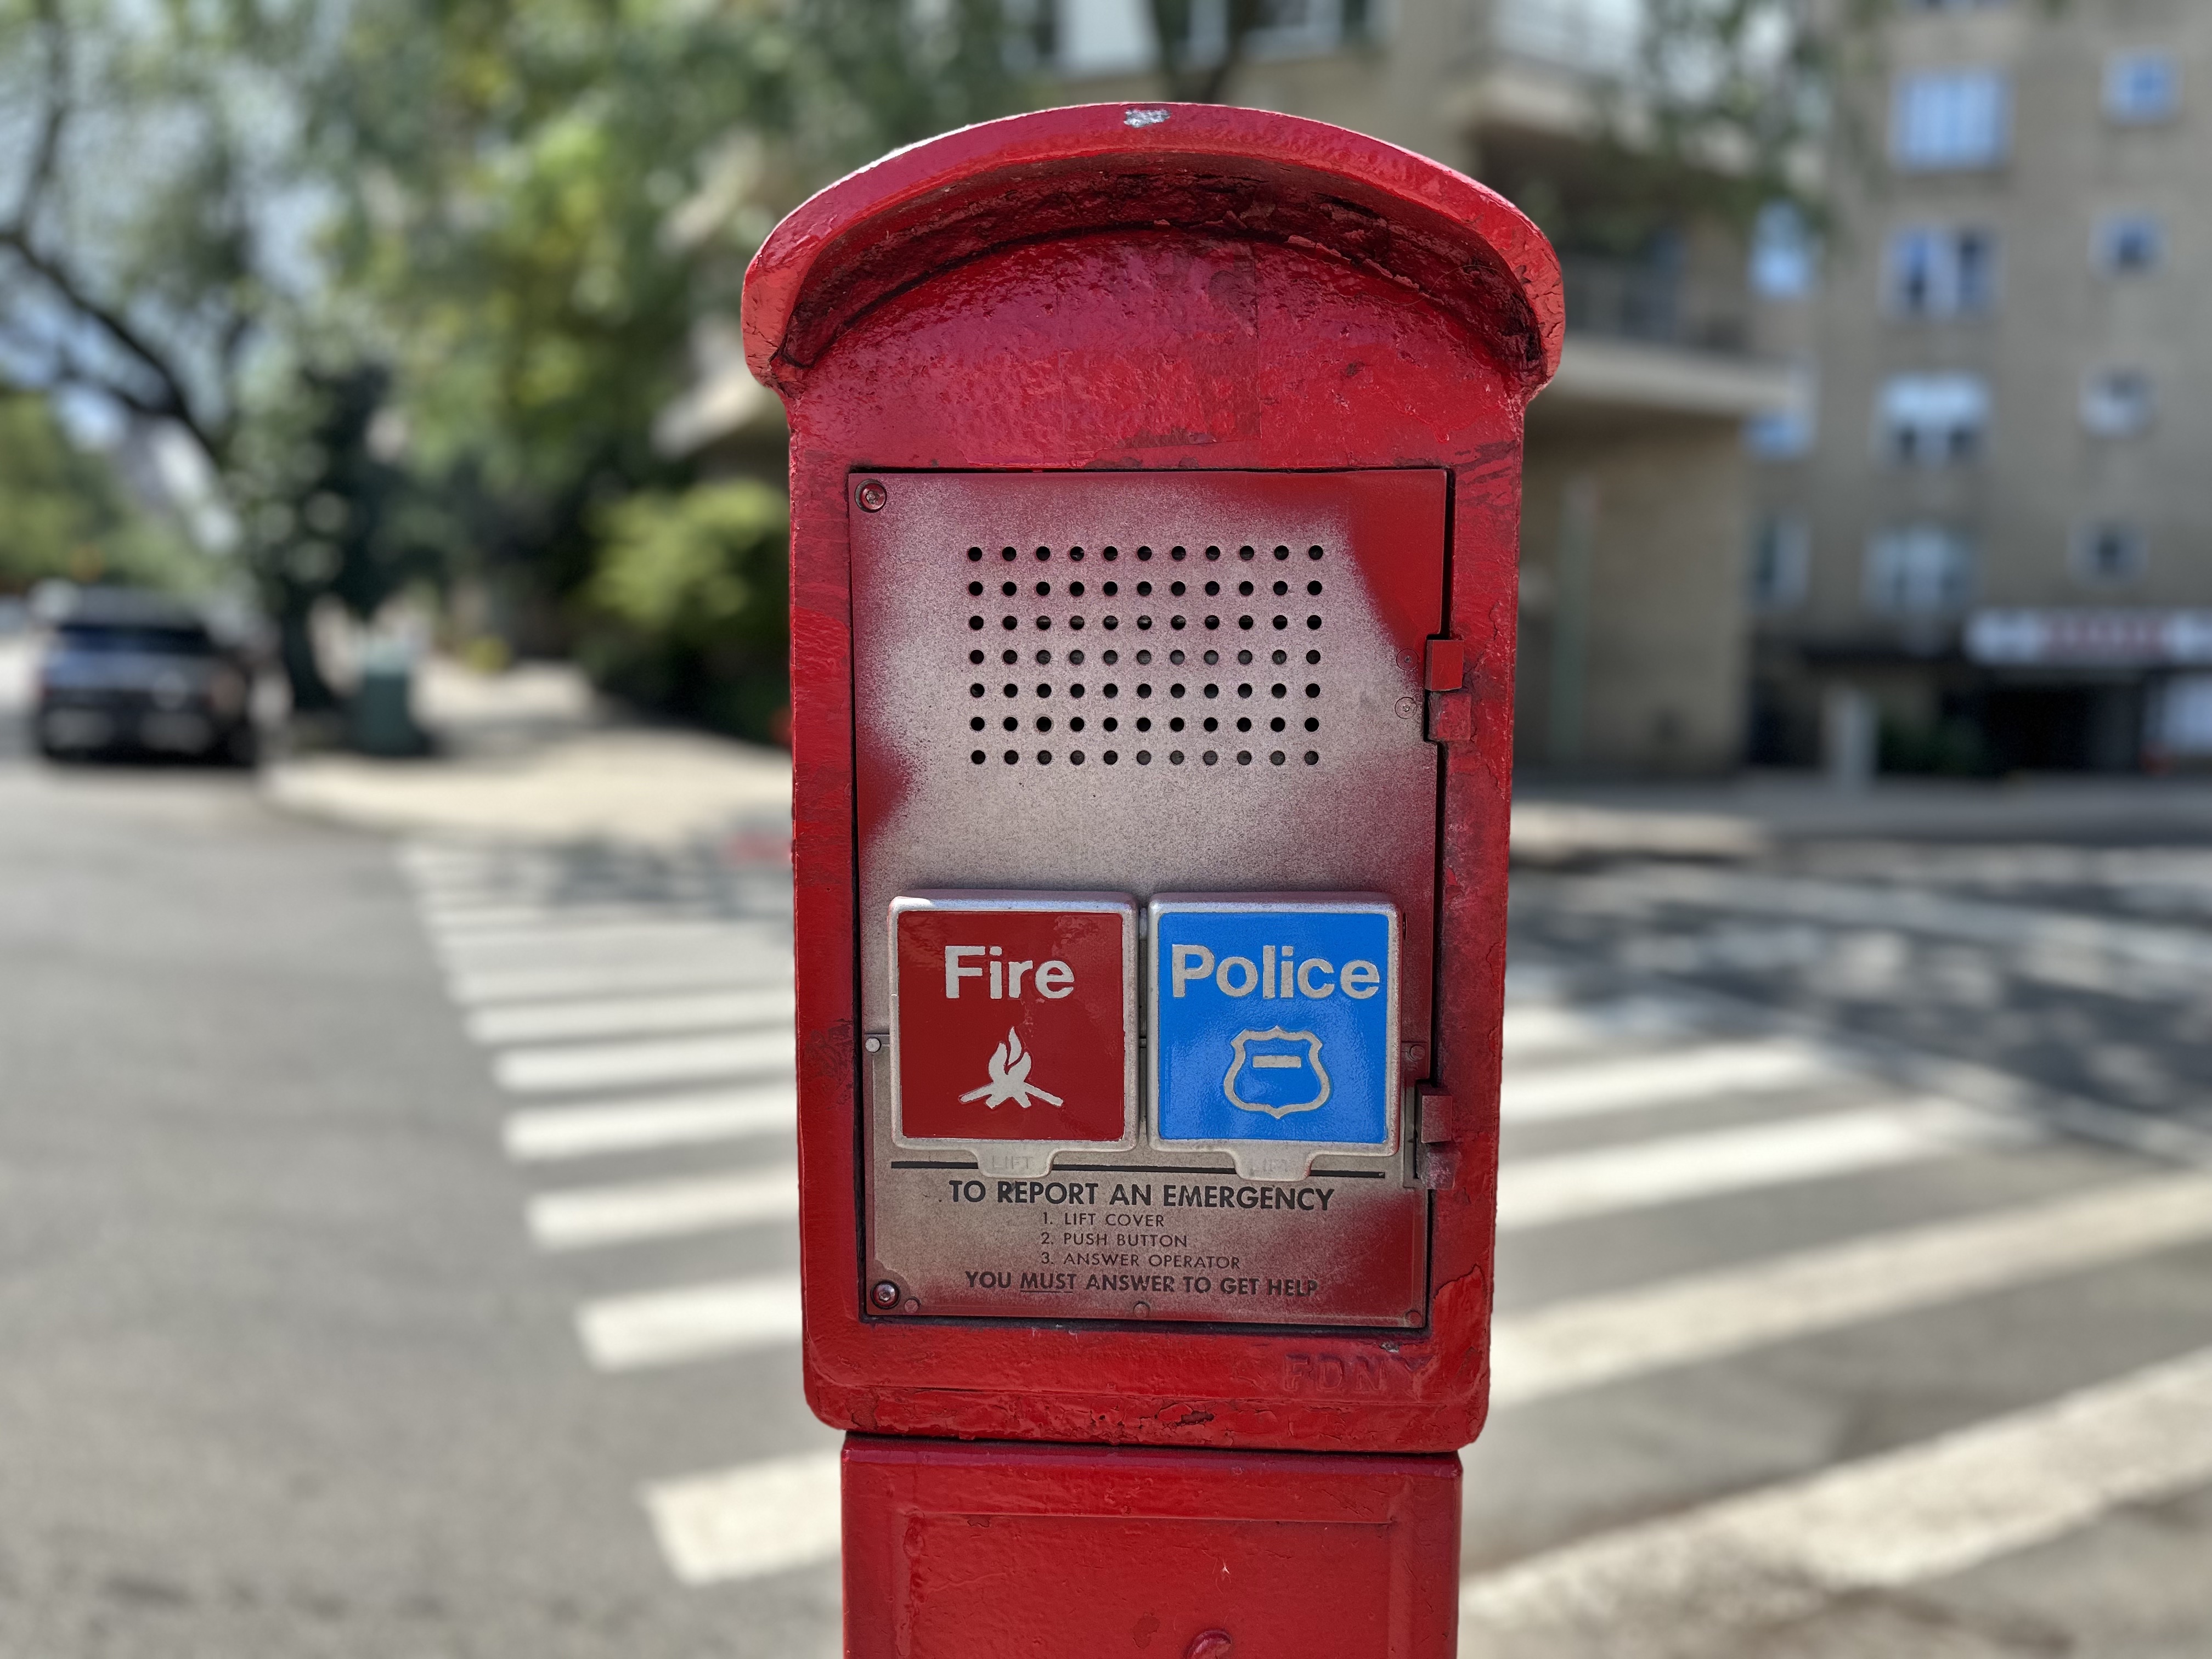 Long obsolete call boxes — but the Fire and Police symbols are clear.